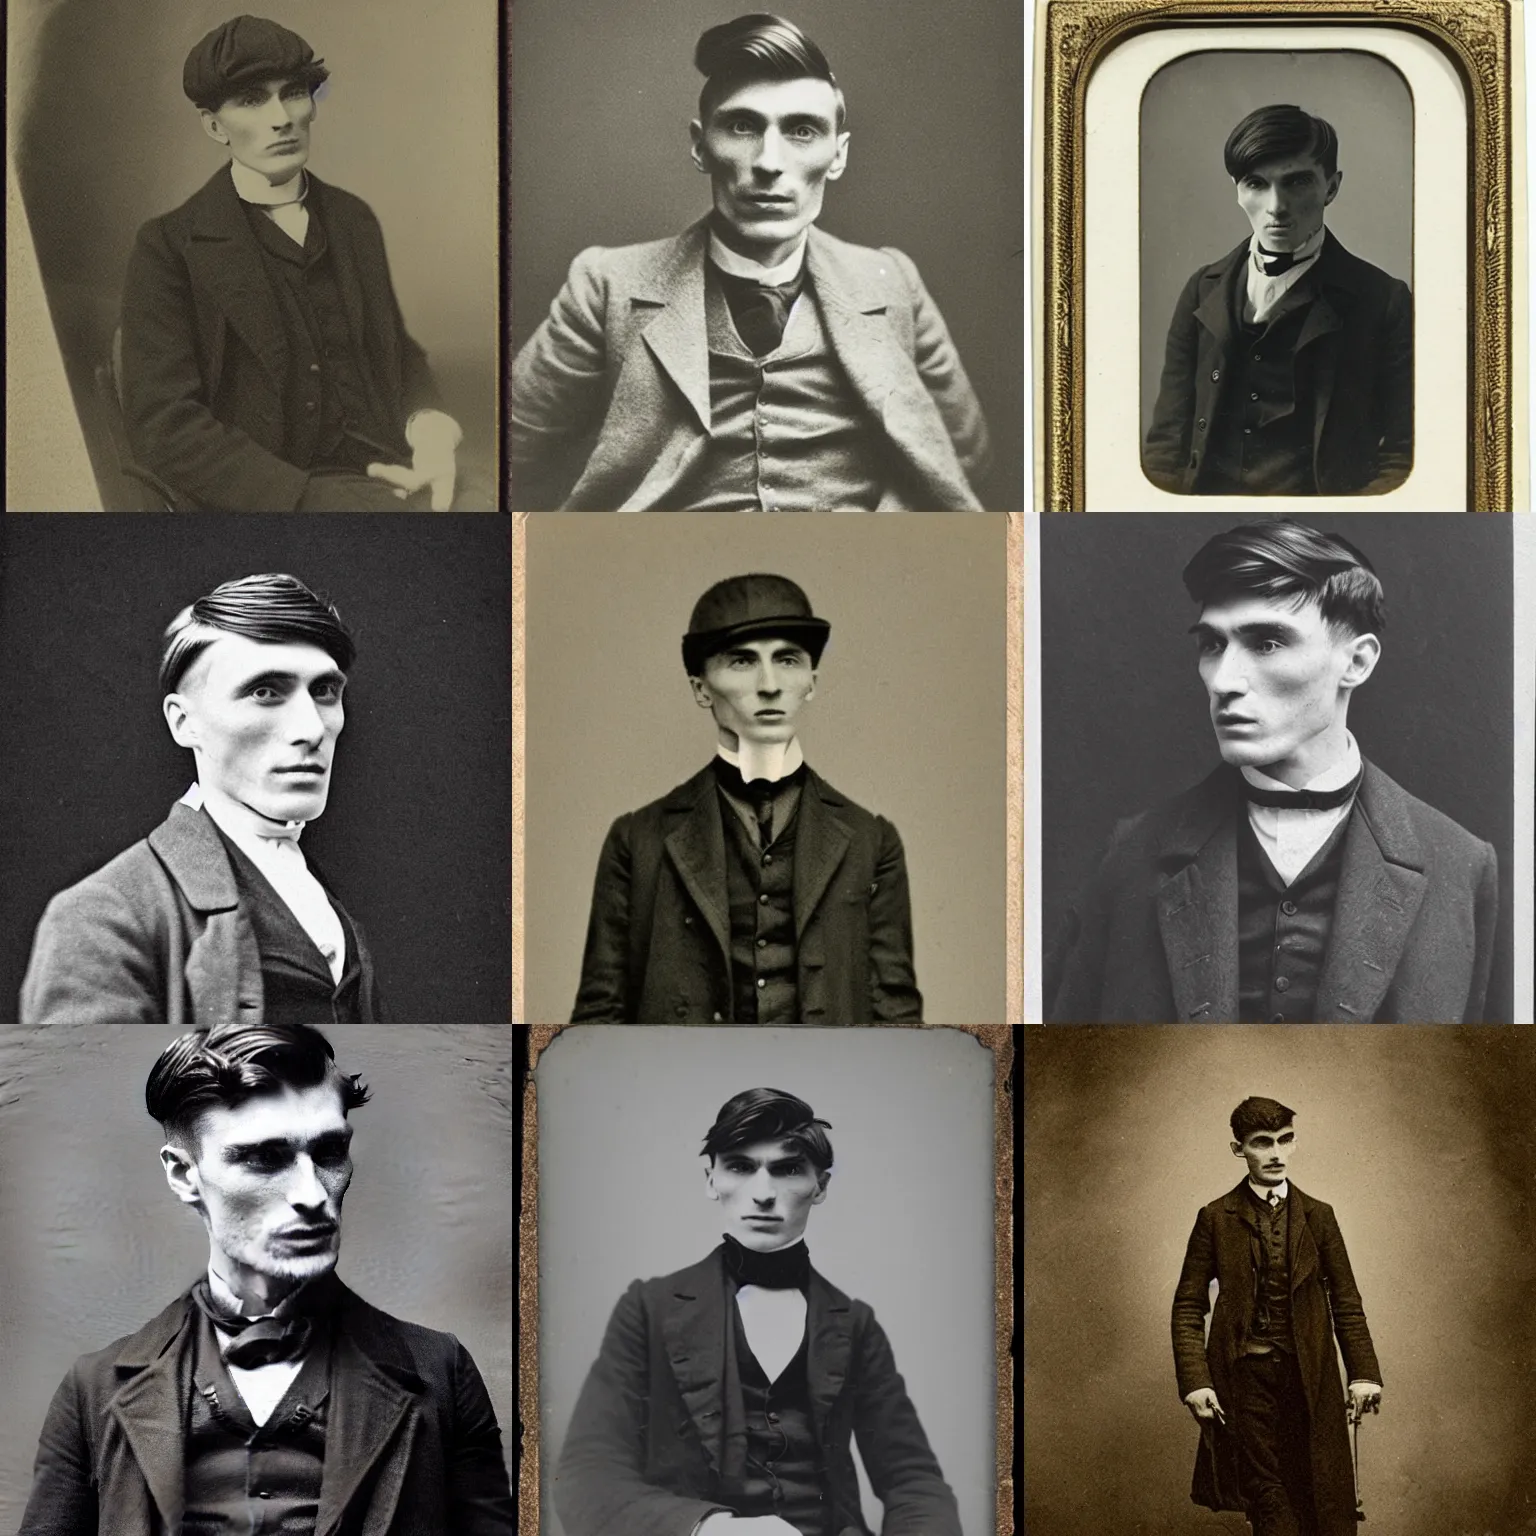 Prompt: Thomas Shelby, 1890s photograph